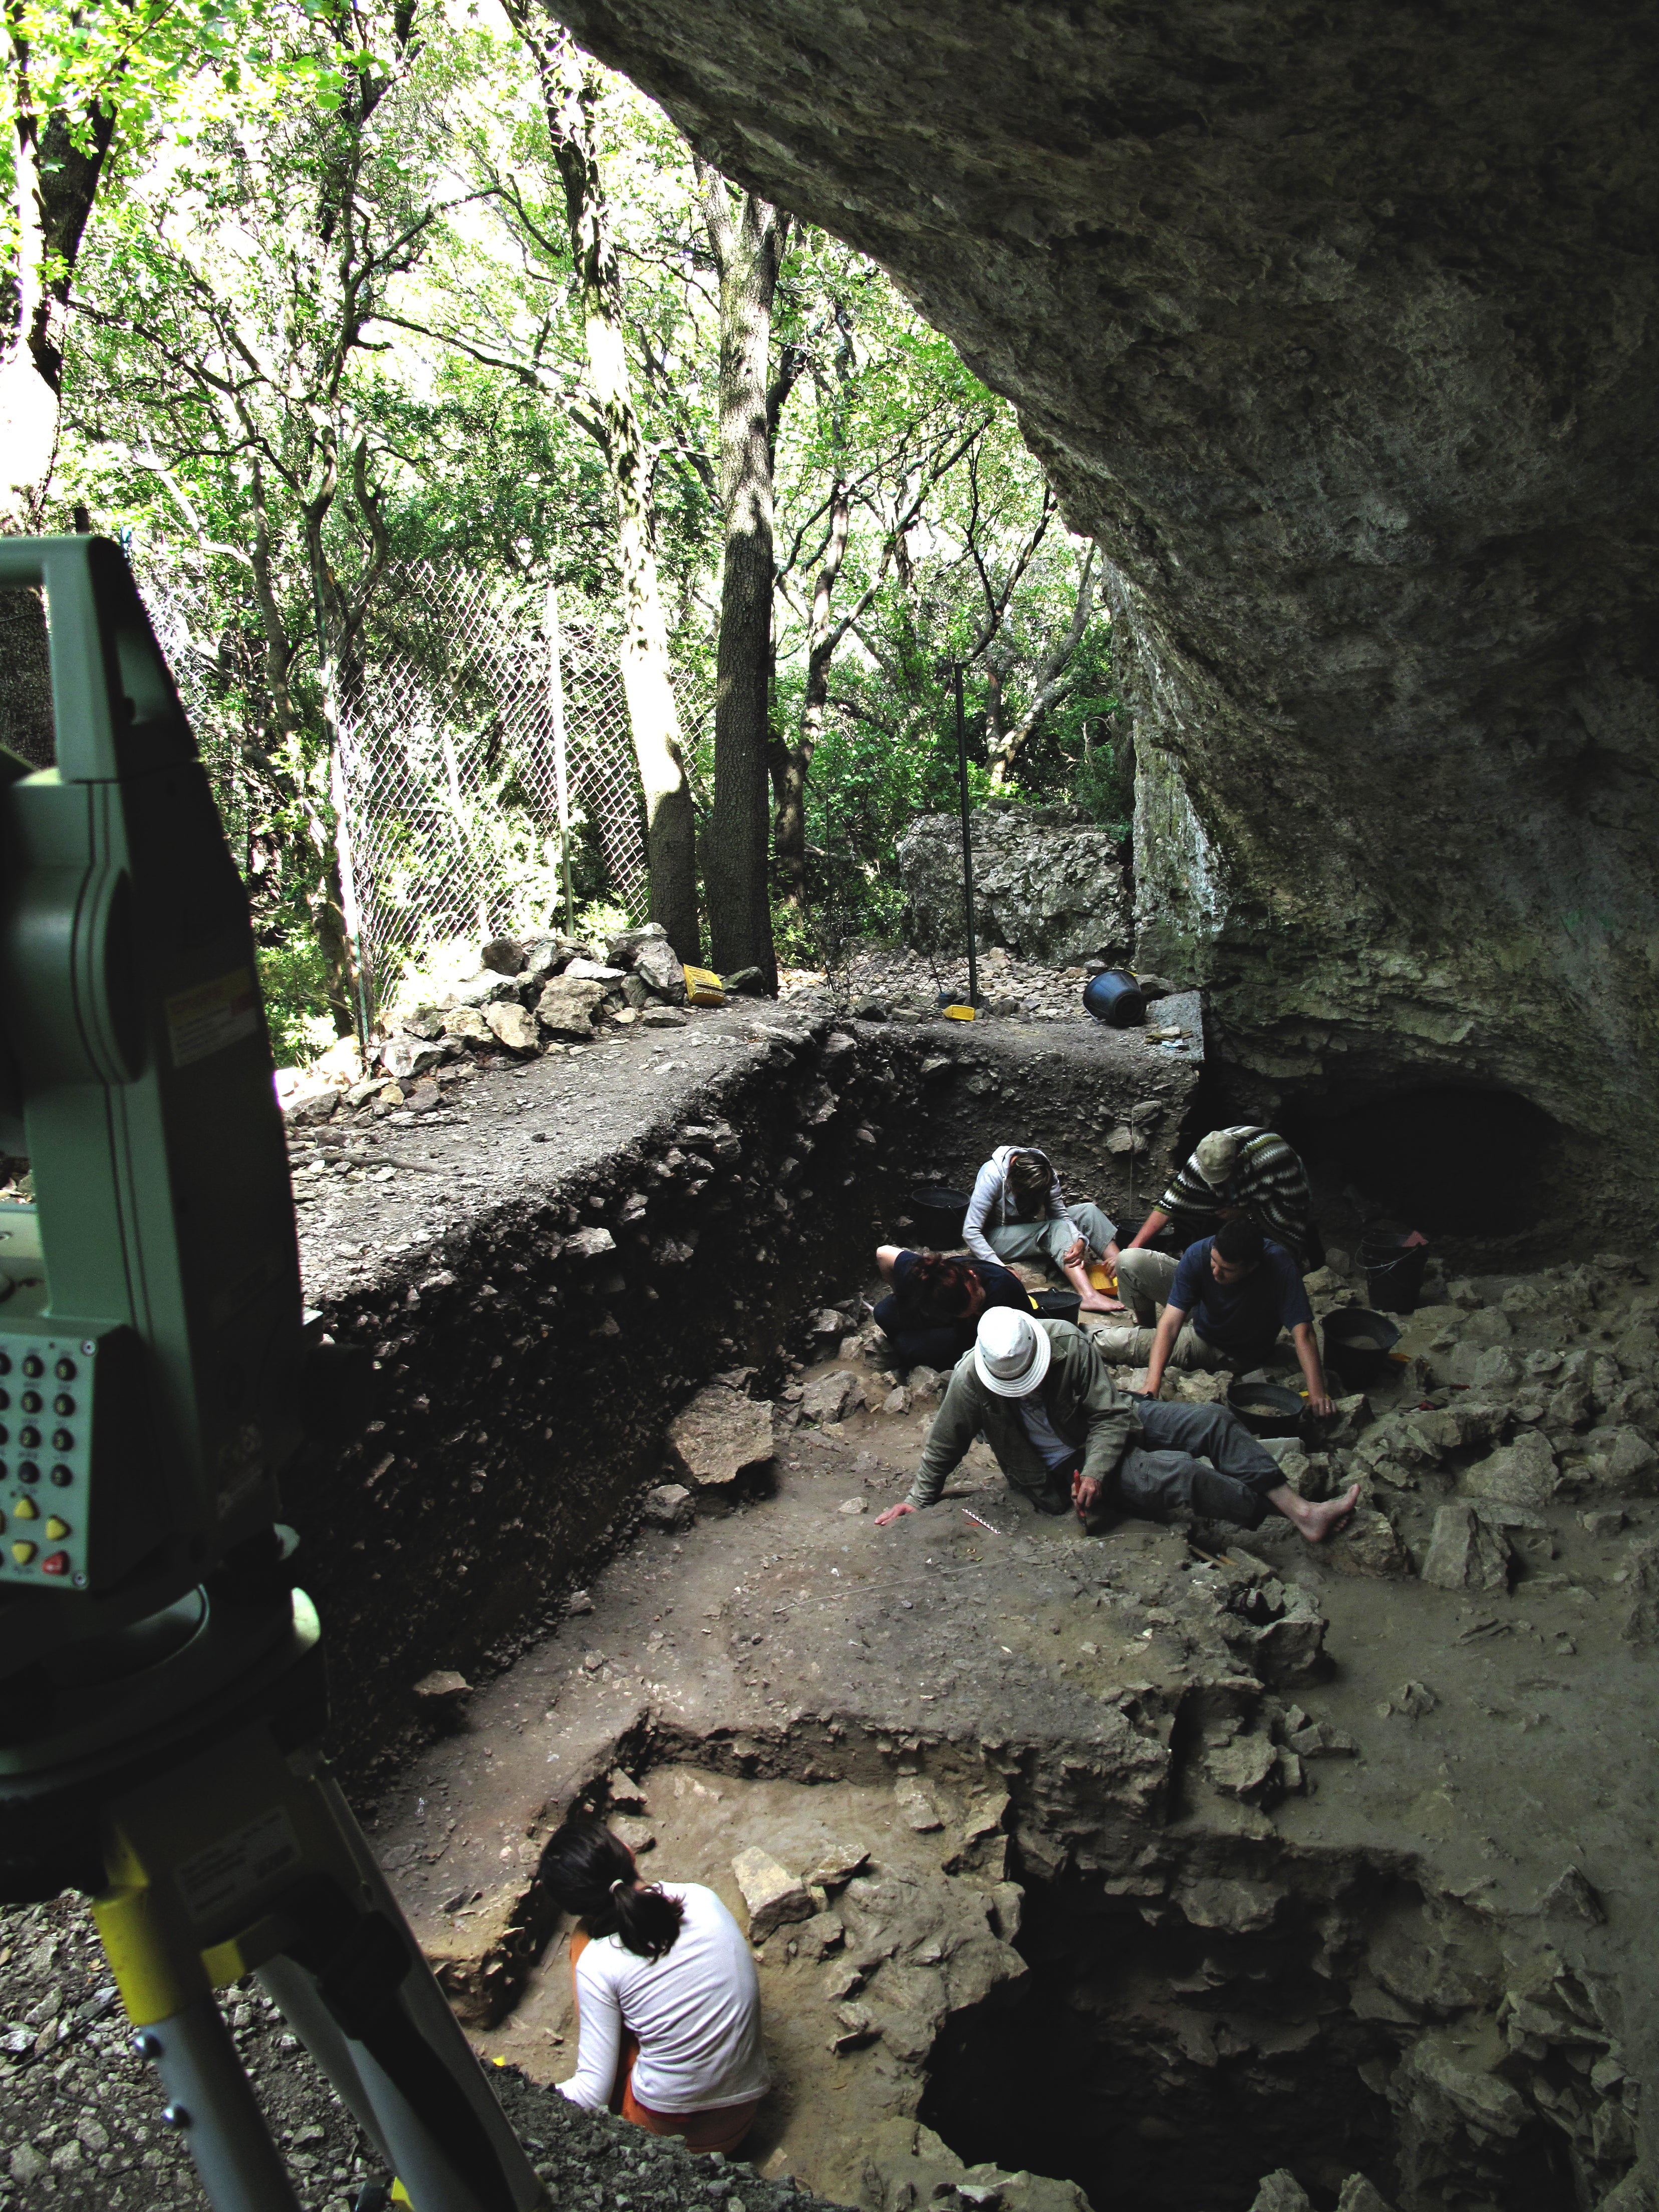 An international team of archaeologists and other scientists, investigating a cave in southern France